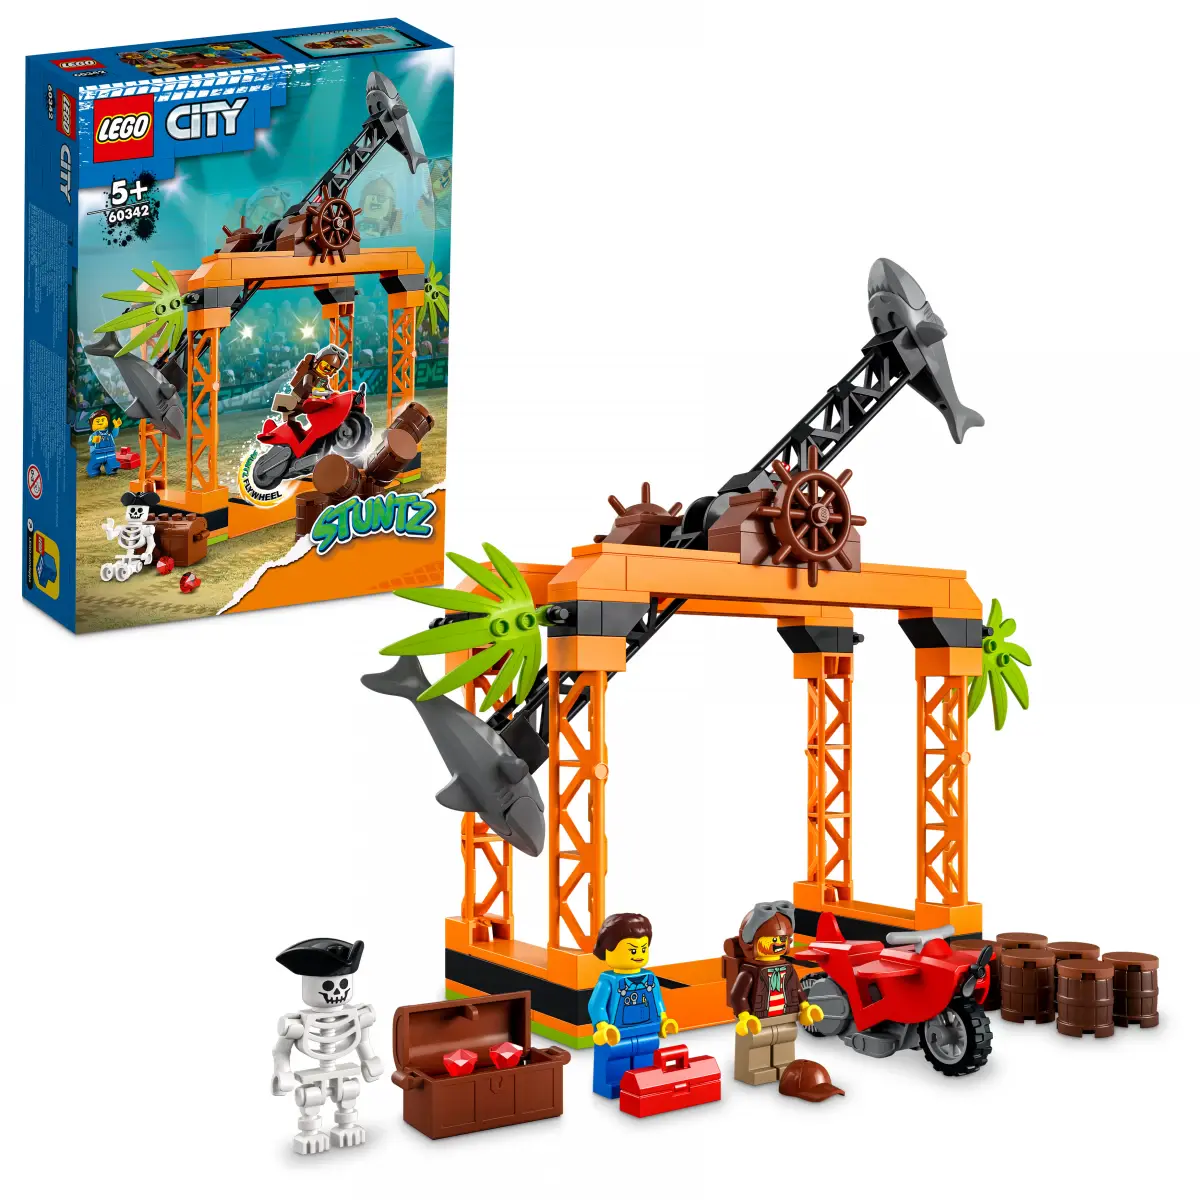 Lego City The Shark Attack Stunt Challenge 60342 Building Kit (122 Pieces)